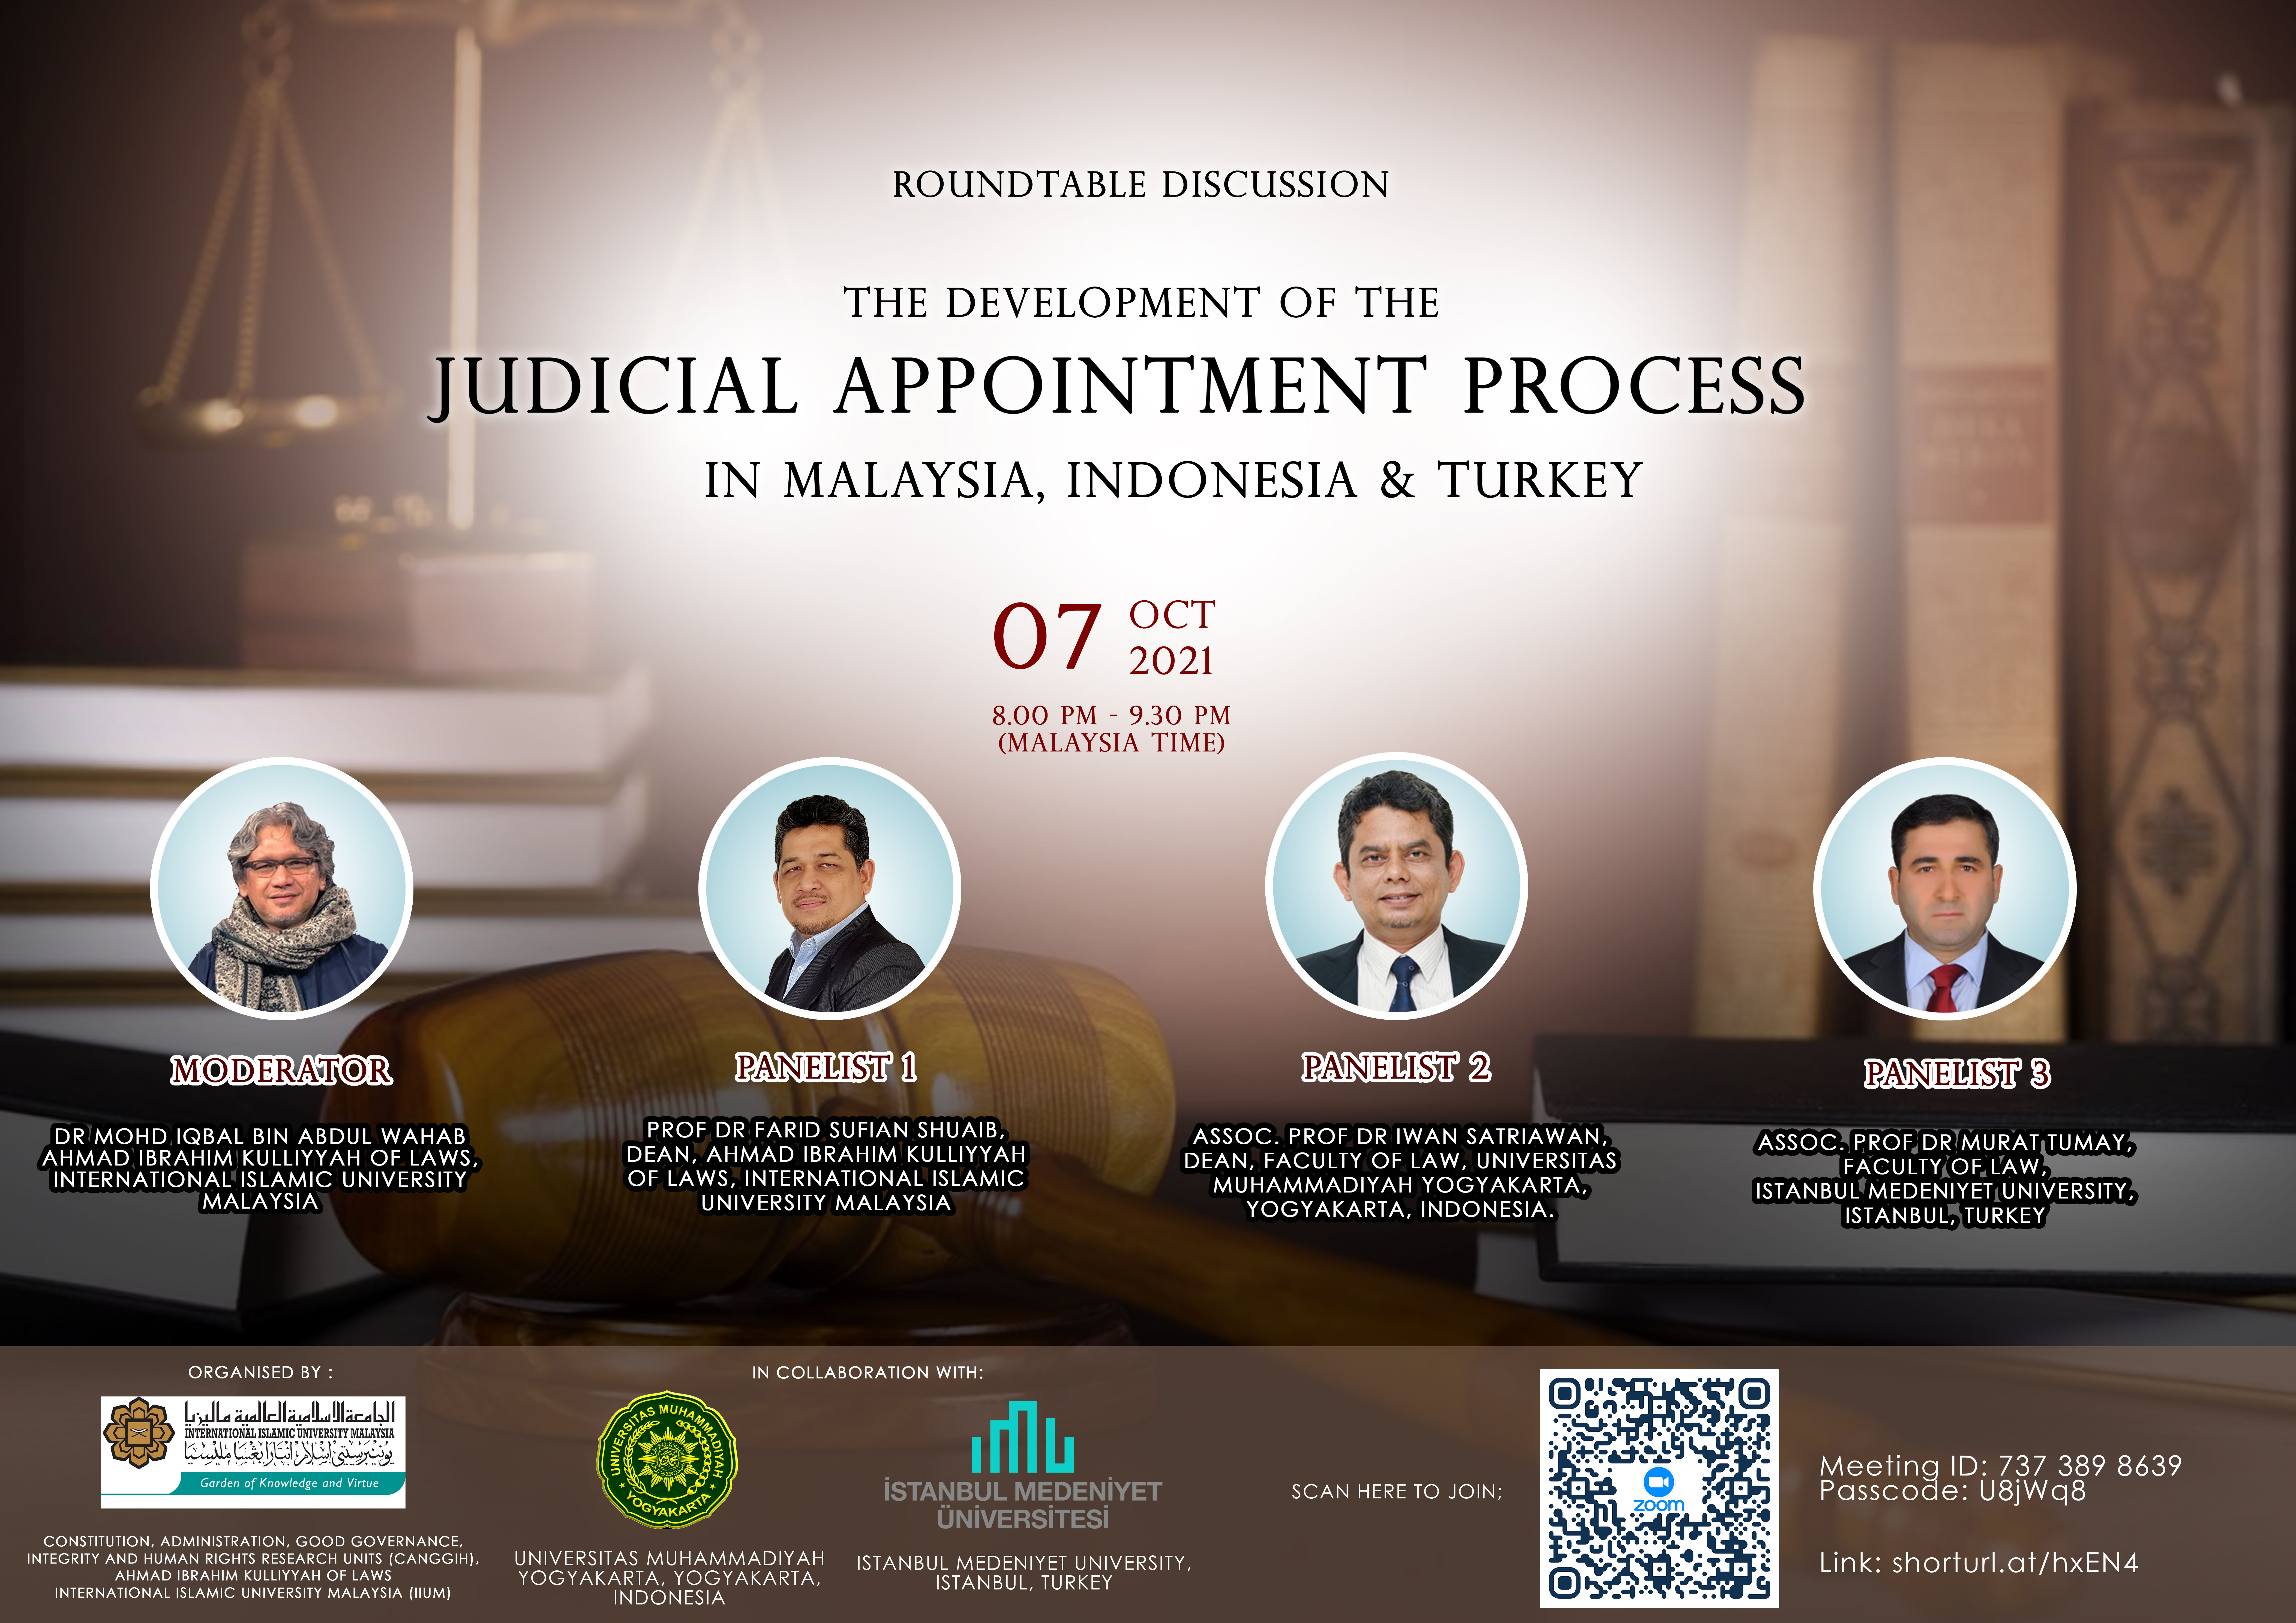 ROUNDTABLE DISCUSSION: THE DEVELOPMENT OF THE JUDICIAL APPOINTMENT PROCESS IN MALAYSIA, INDONESIA & TURKEY